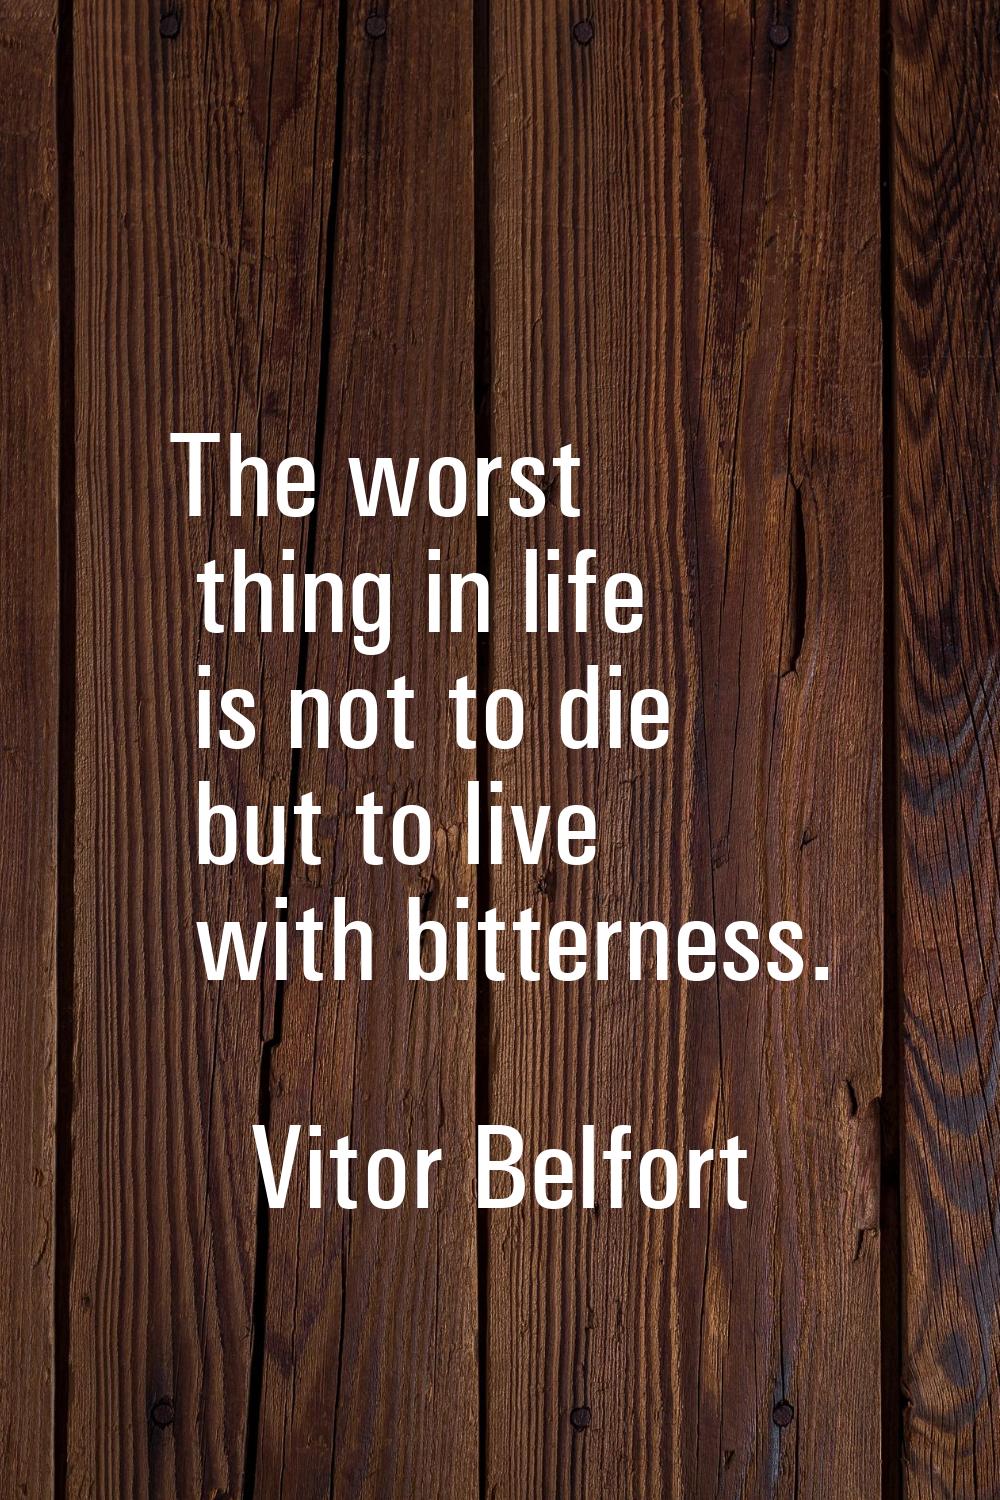 The worst thing in life is not to die but to live with bitterness.